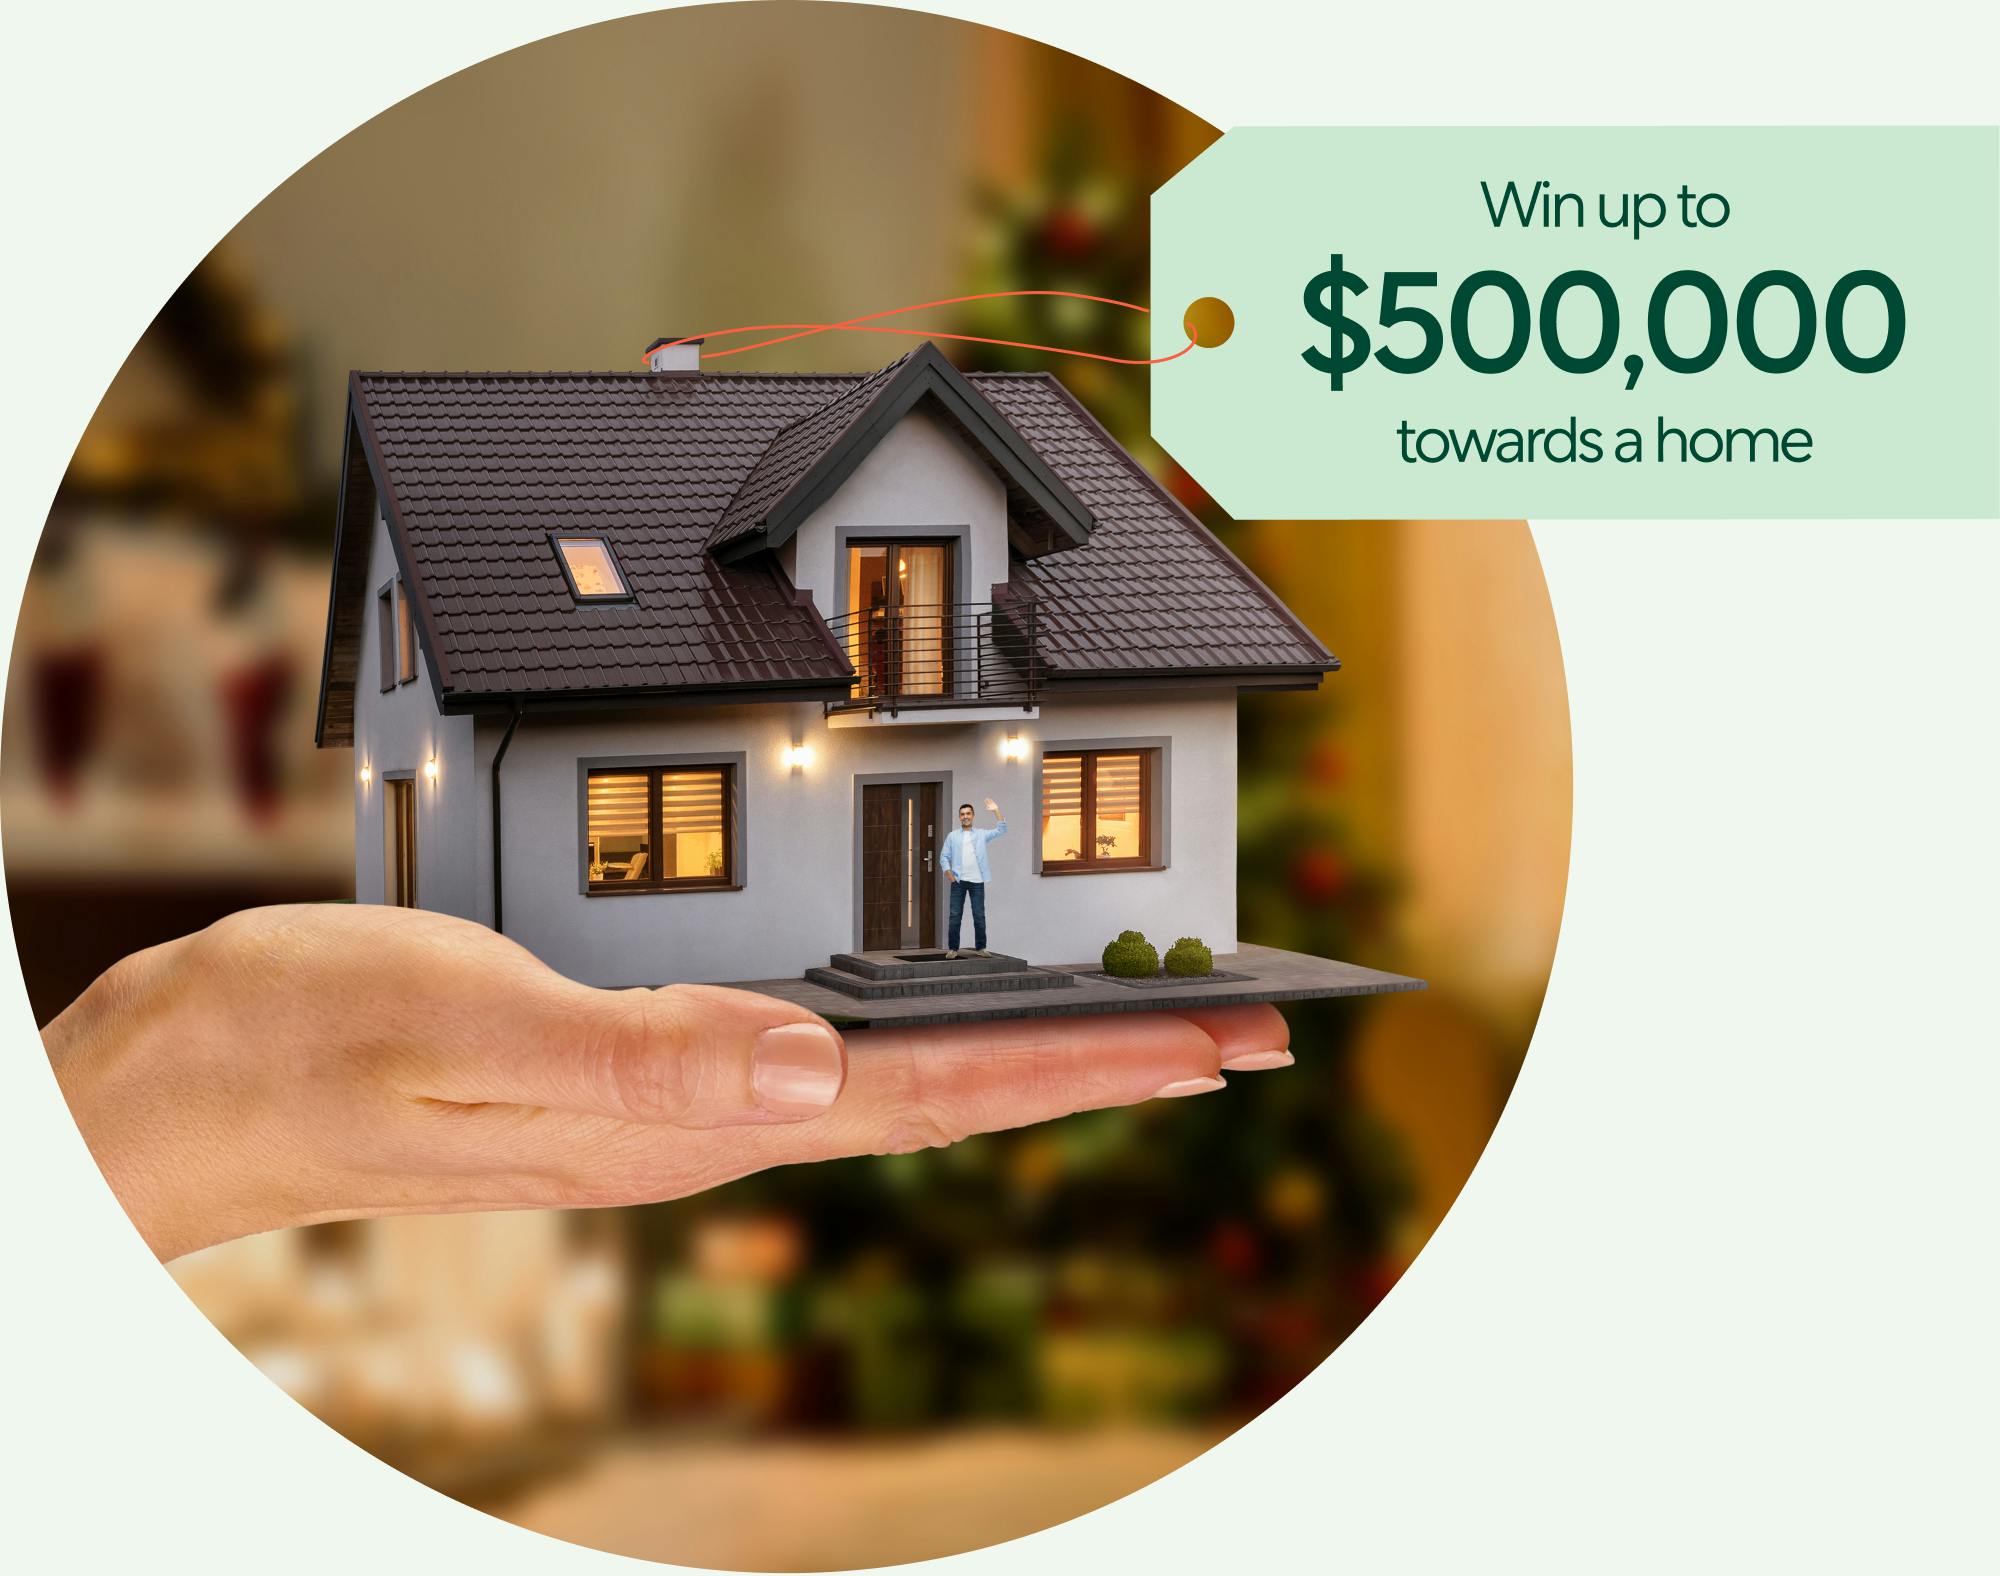 House in hand – Win up to $500,000 towards a home